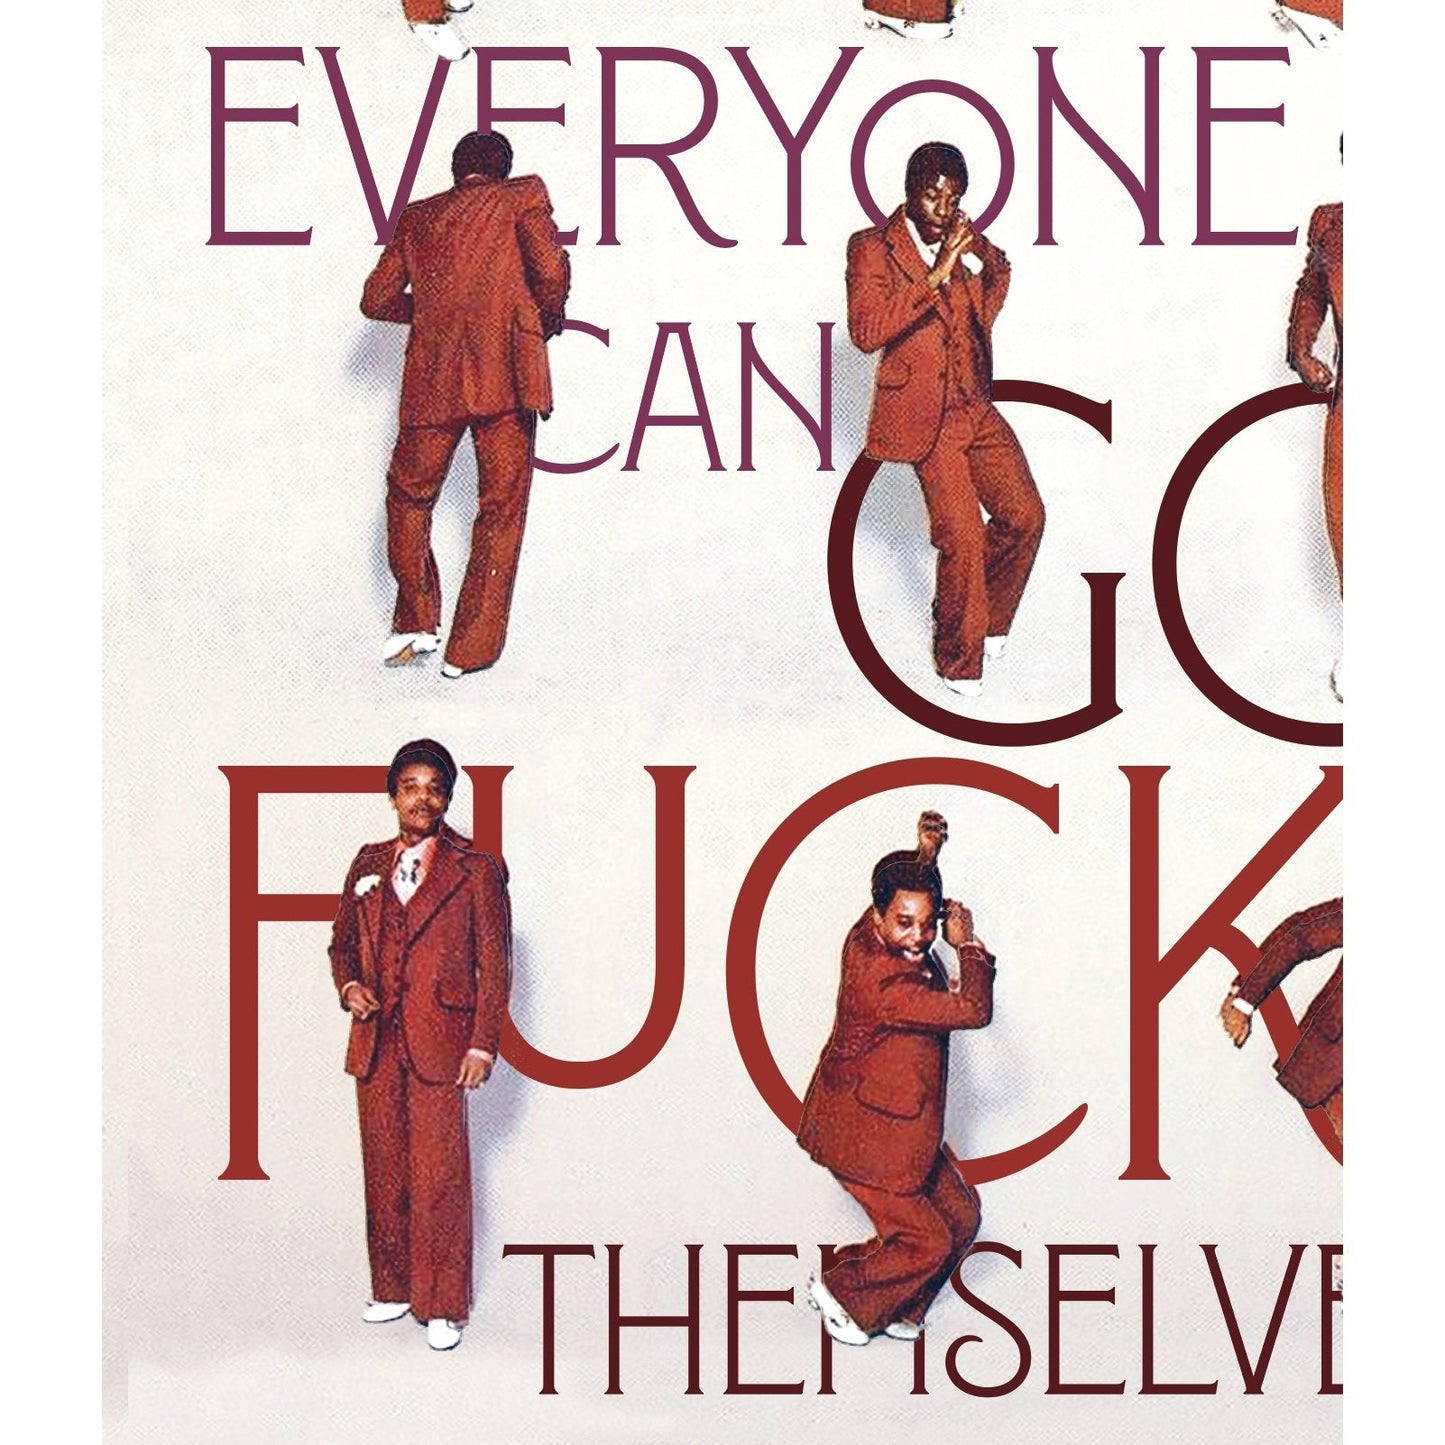 Dance Like Everyone Can Go Fuck Themselves Greeting Card